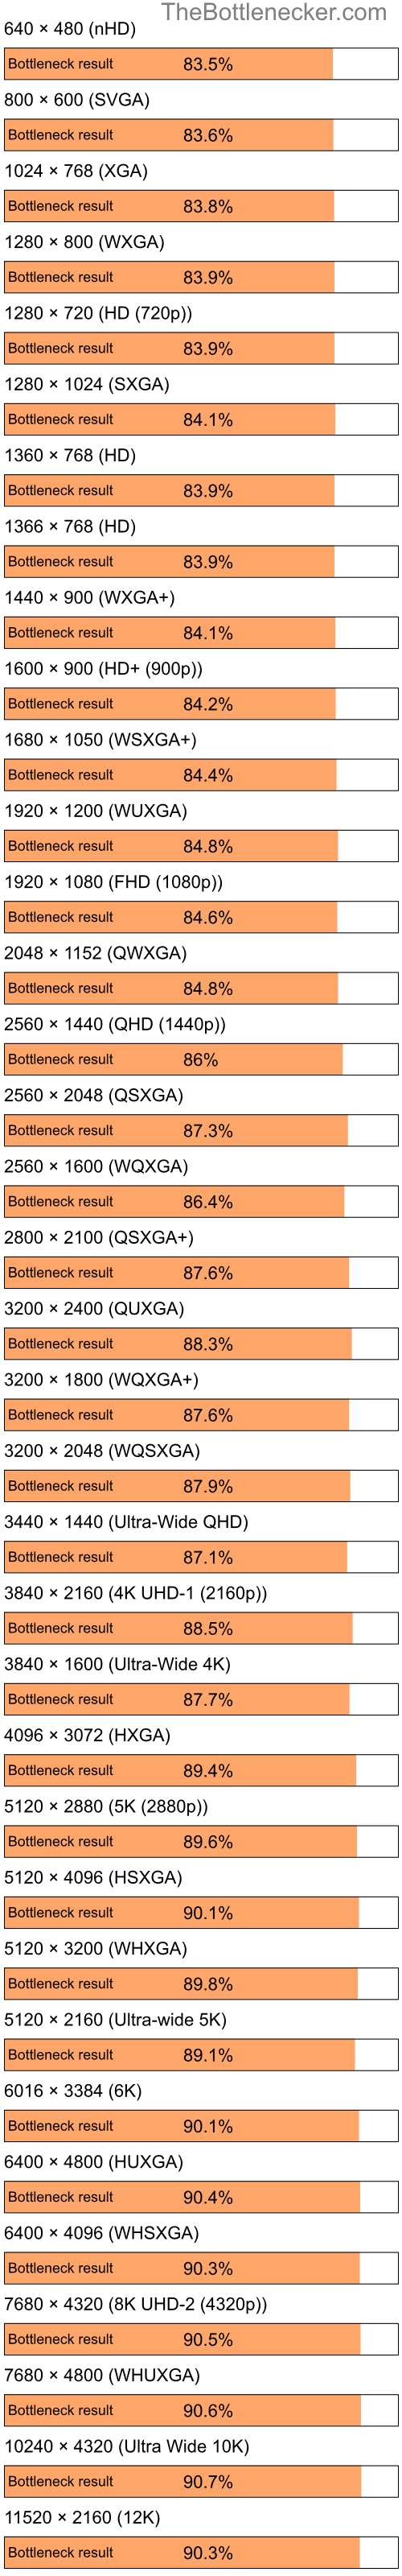 Bottleneck results by resolution for Intel Atom Z520 and NVIDIA GeForce 6100 nForce 400 in Graphic Card Intense Tasks